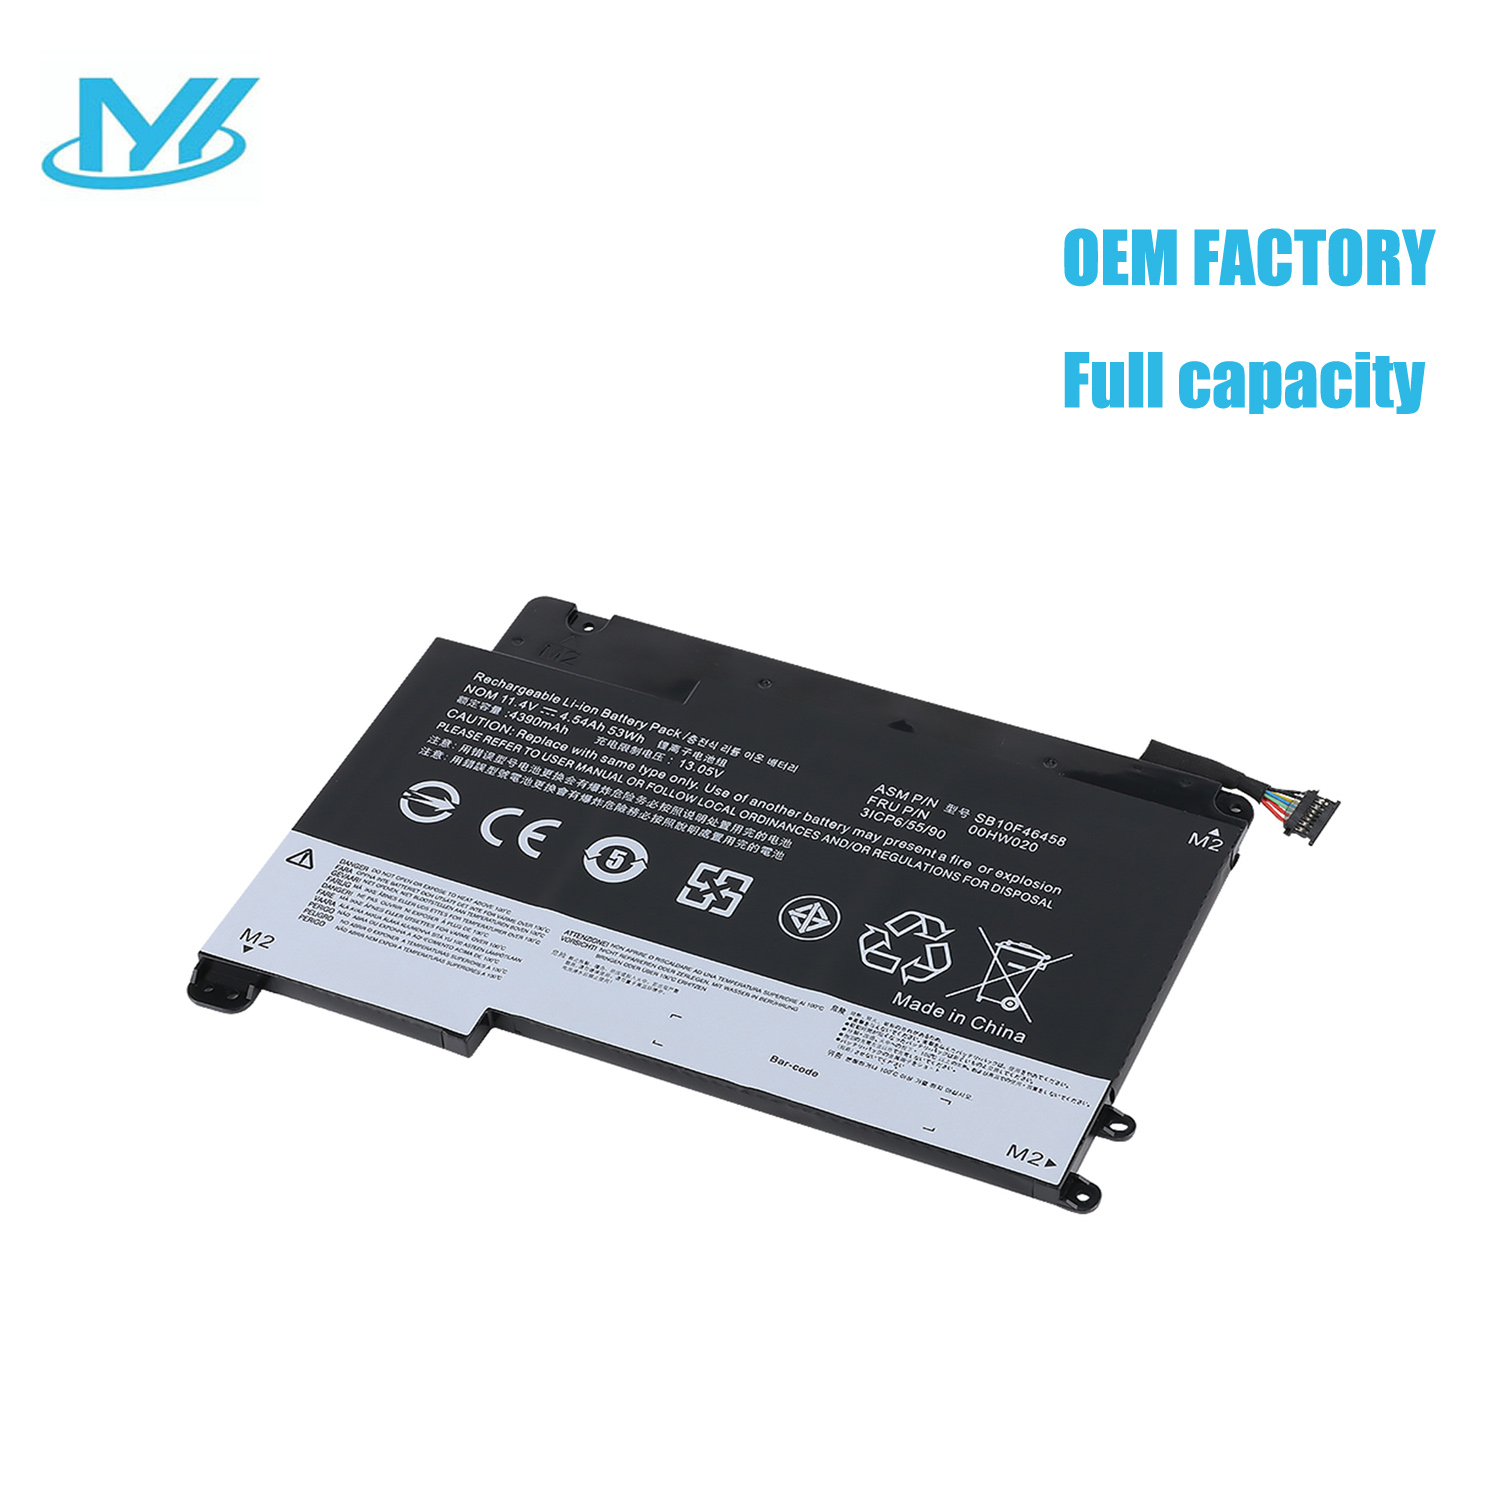 00HW020 rechargeable lithium ion Notebook battery Laptop battery LENOVO ThinkPad Yoga 460 20ELS039GE, ThinkPad Yoga 460 20EM, ThinkPad Yoga 460 20FY, ThinkPad Yoga 460 20G,